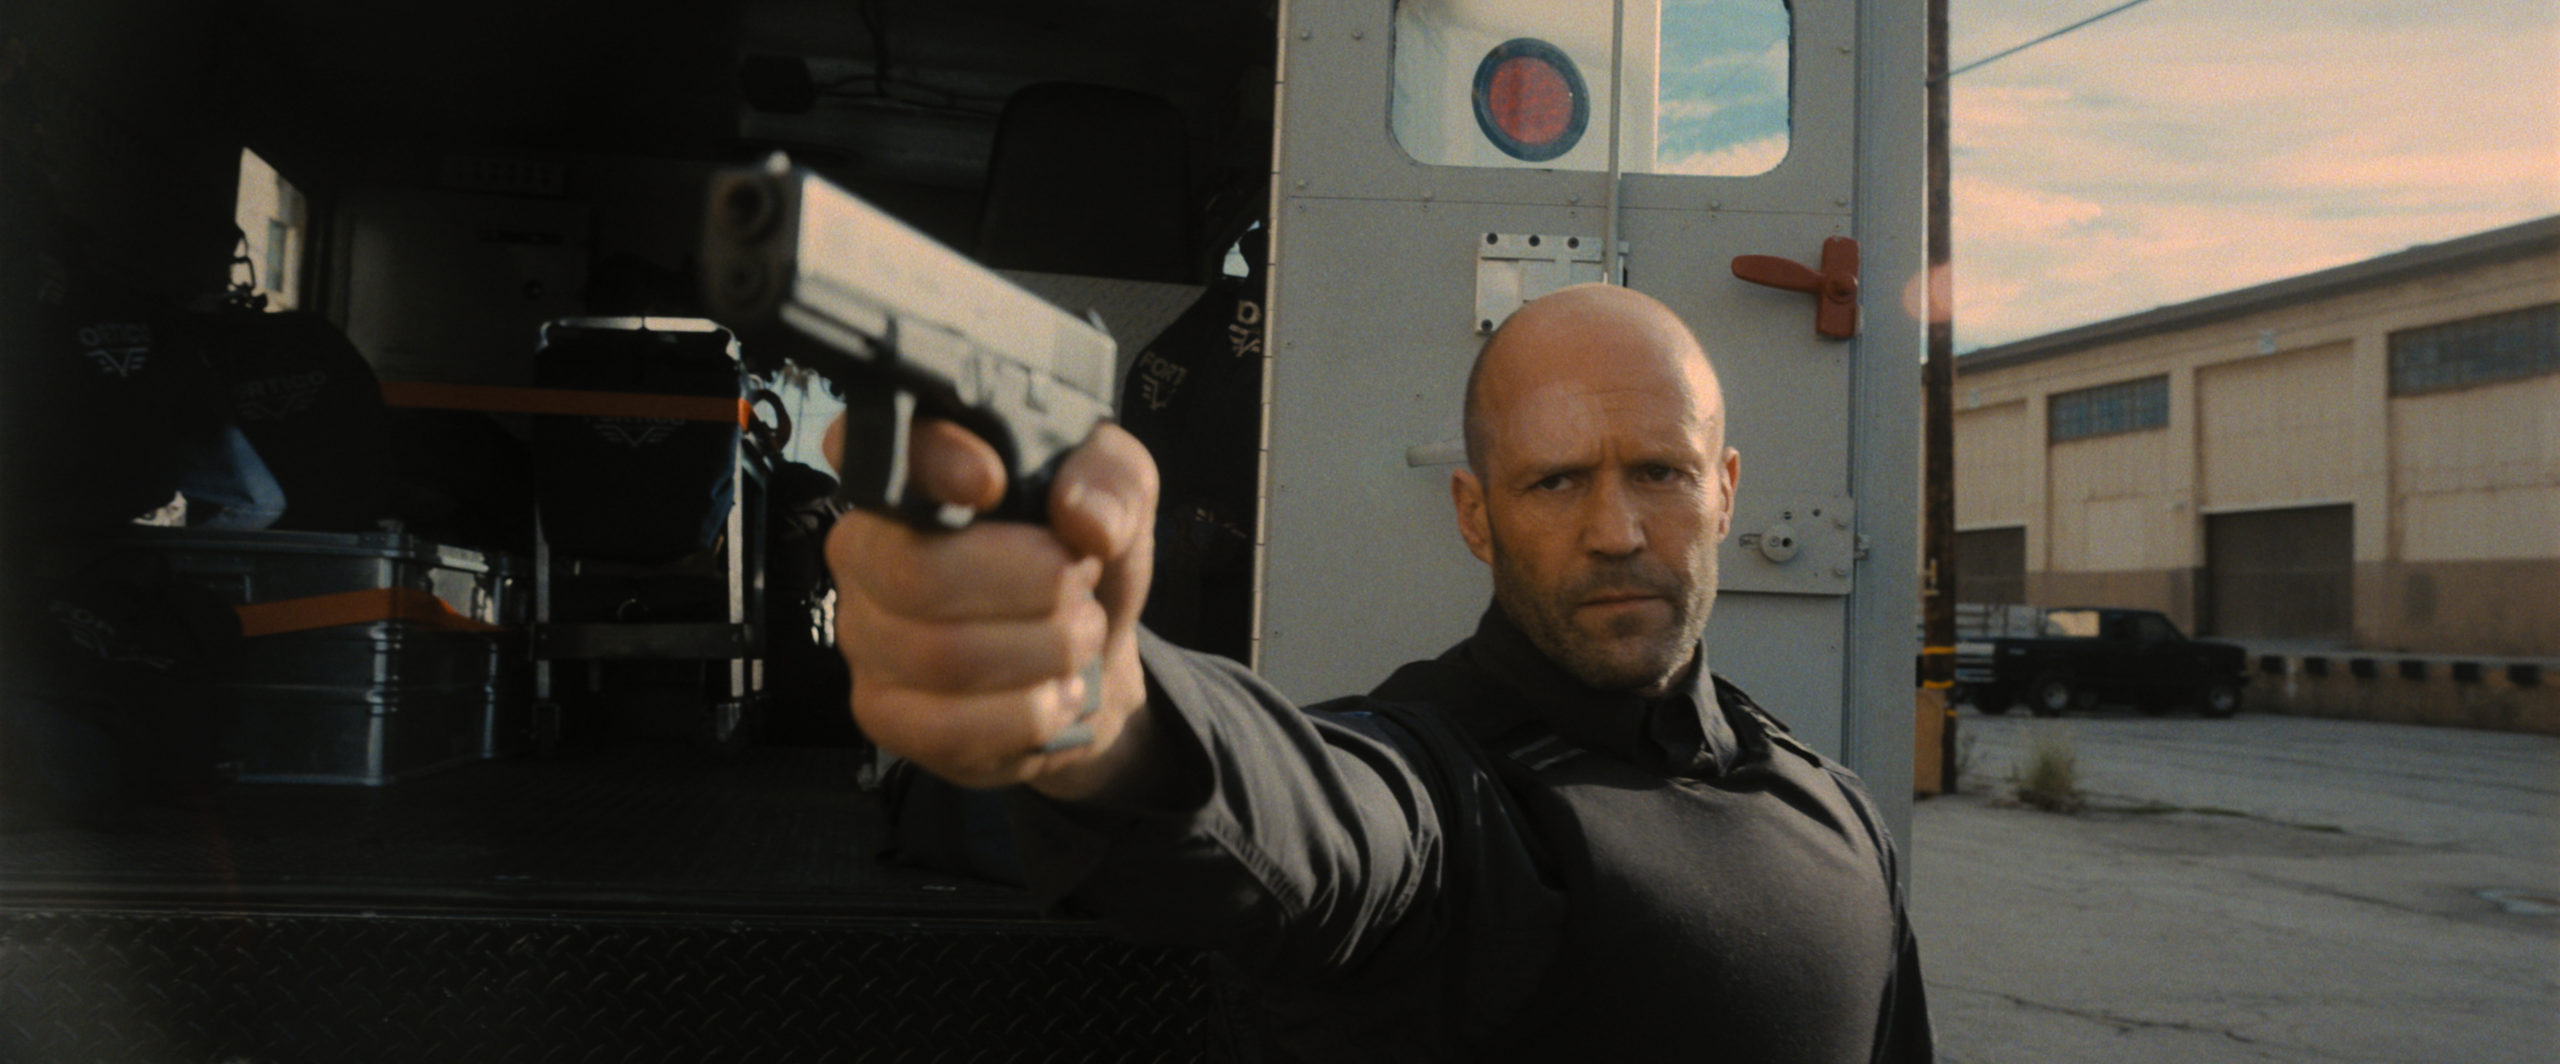 Wrath of Man Trailer Has Jason Statham Searching for His Son’s Murderer